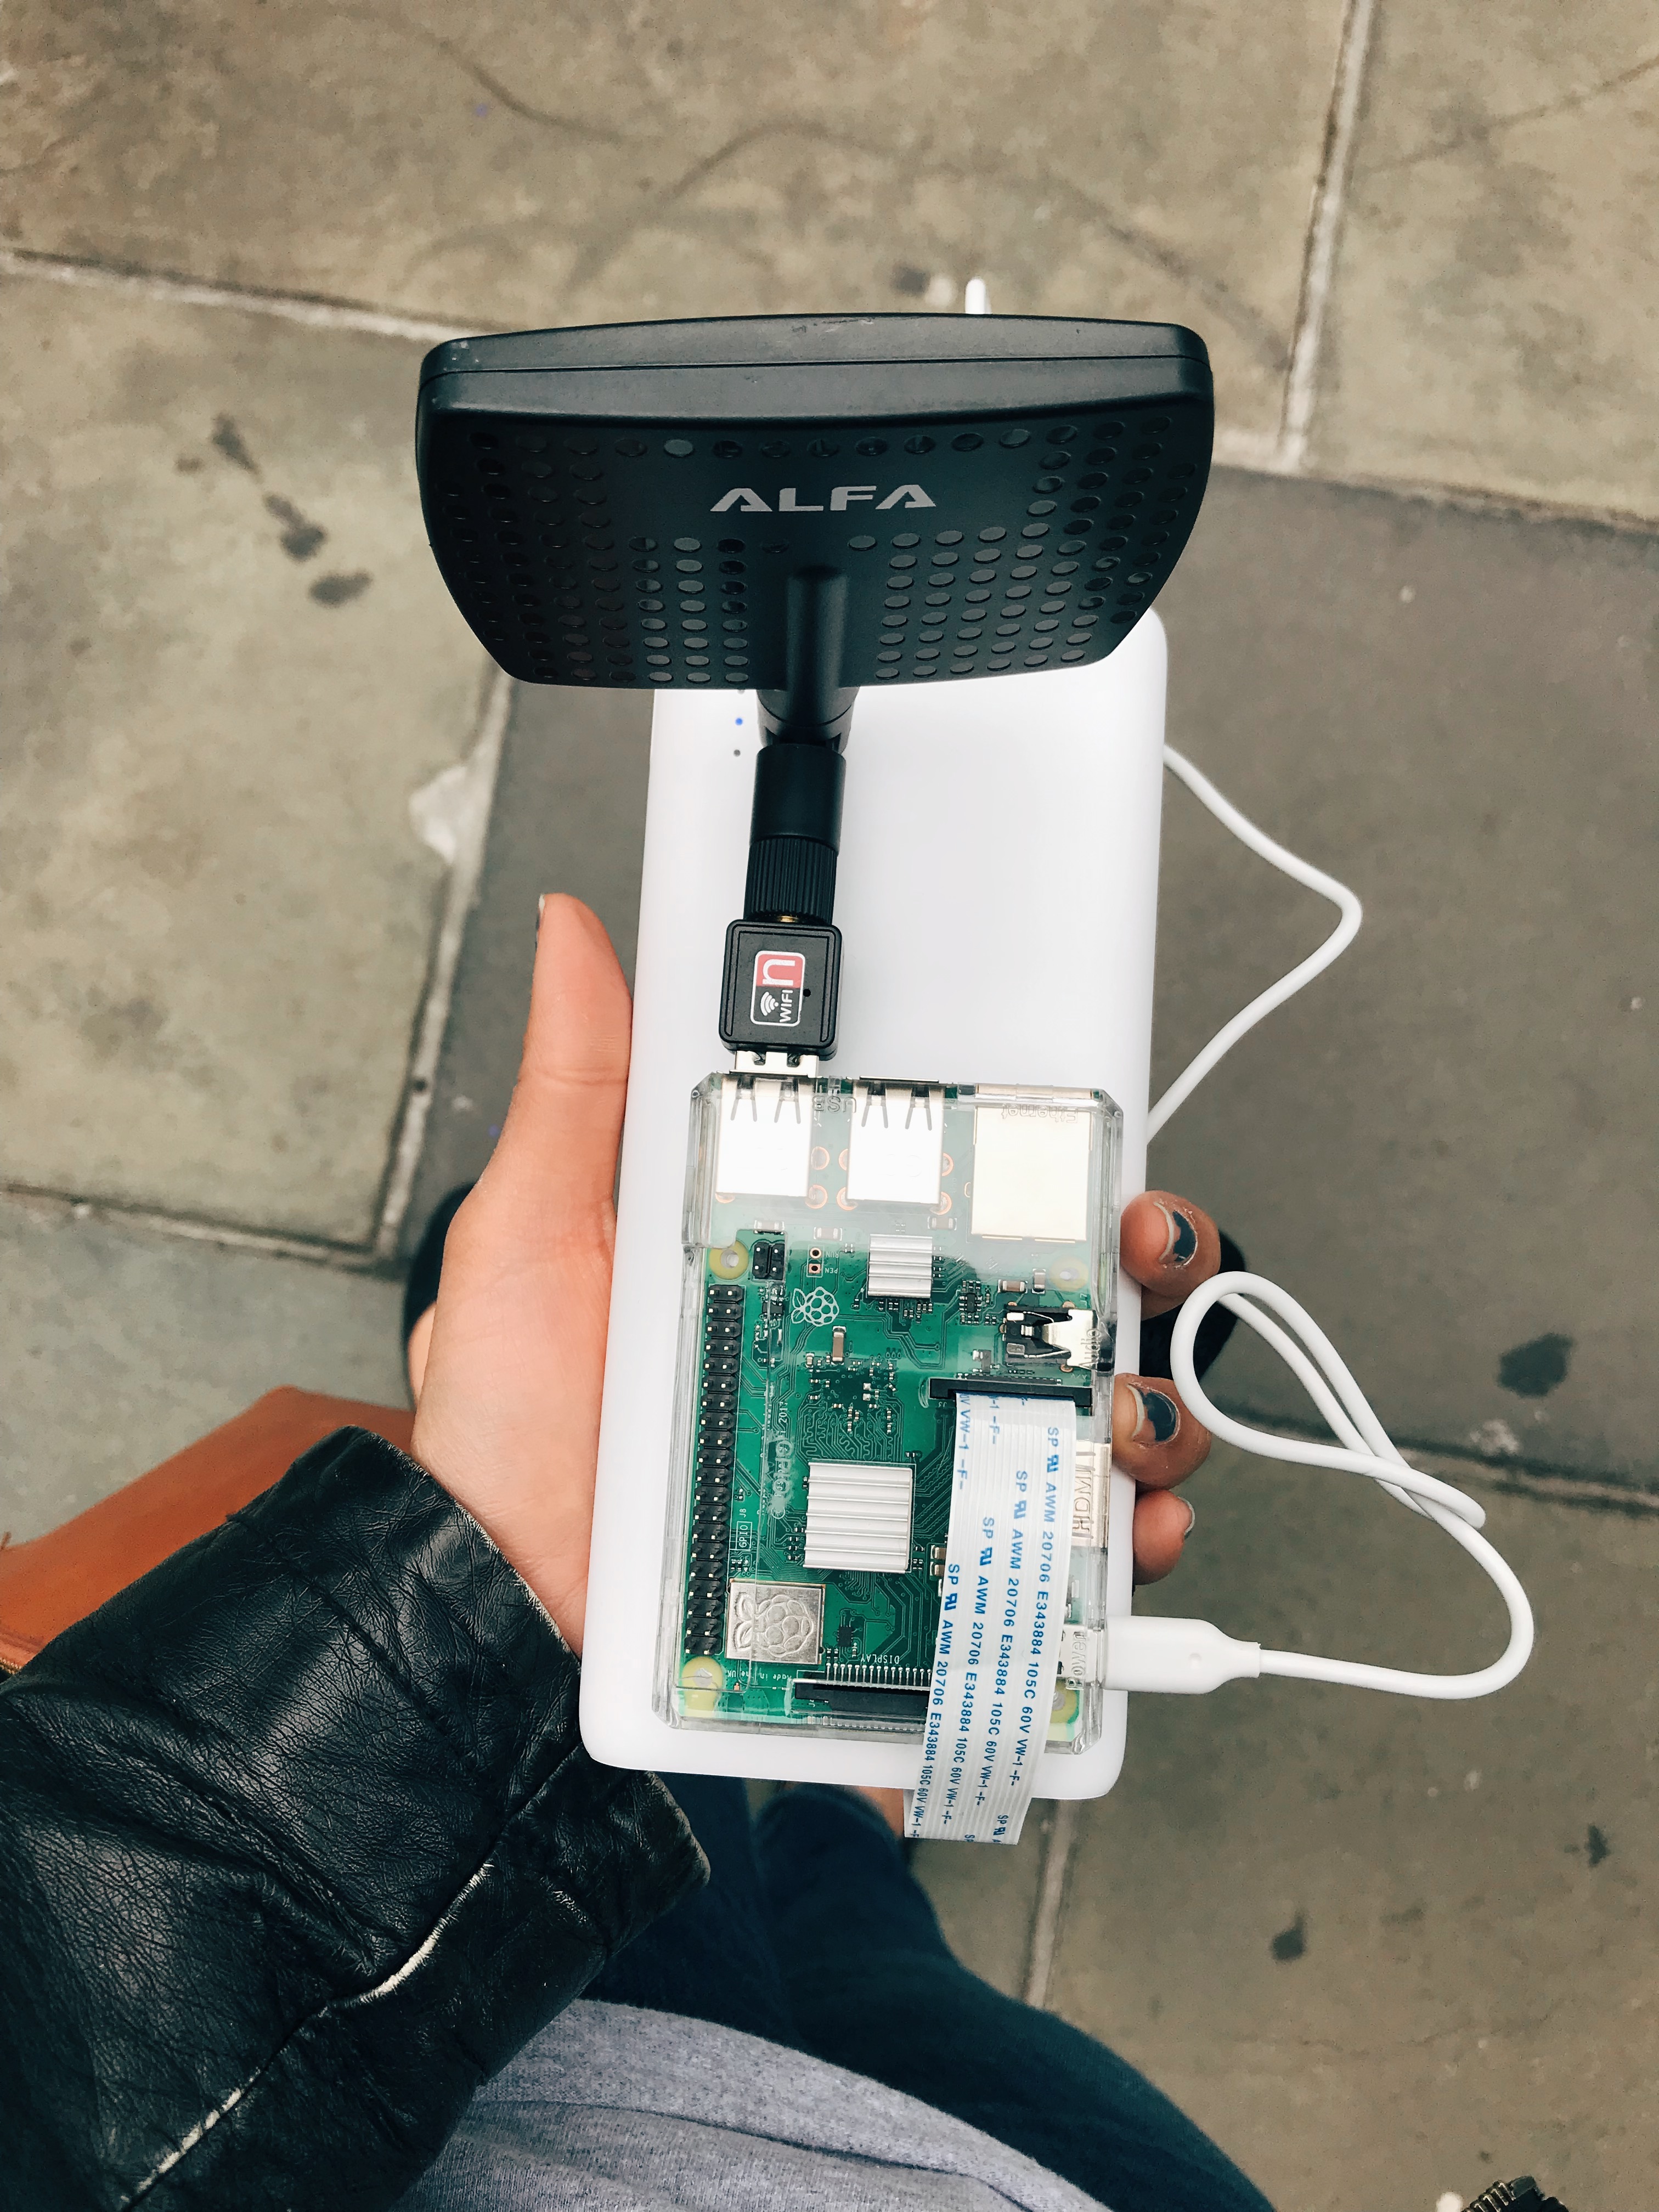 A hand holding a portable battery device and a raspberry pi with WiFi antenna attached.